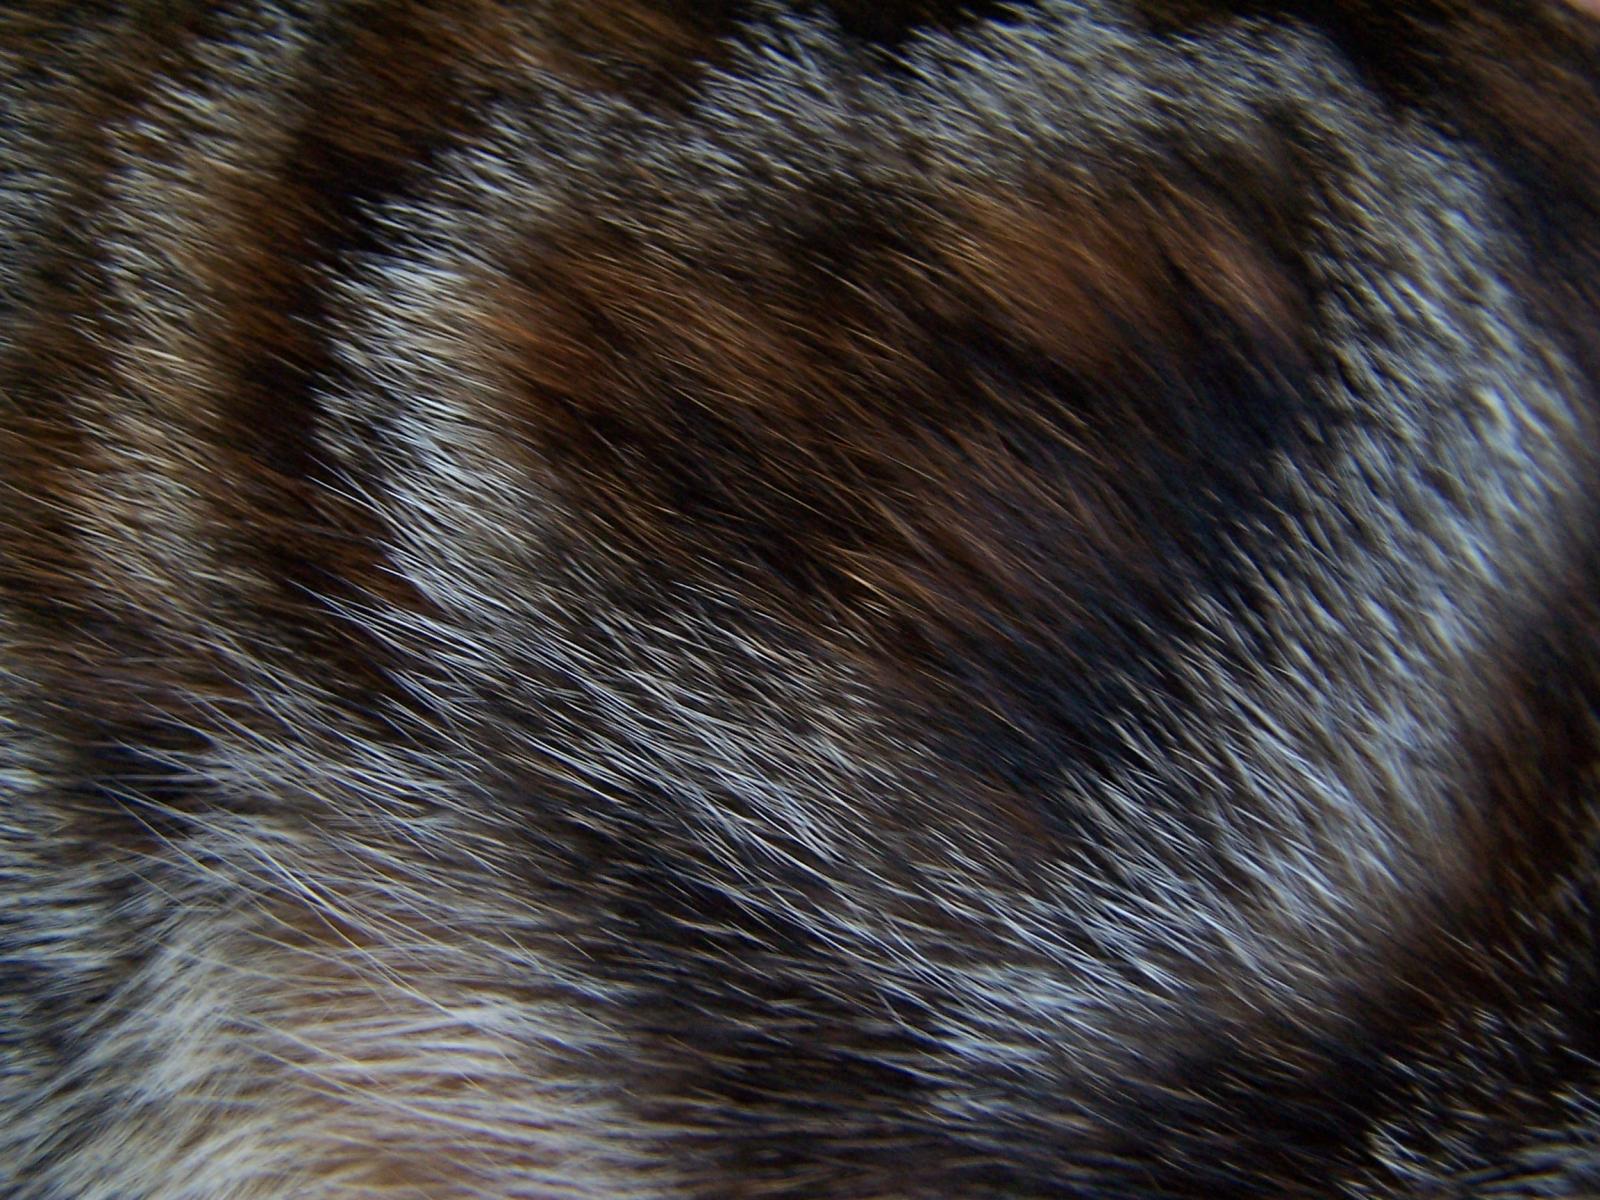 an animal is showing its fur like a pattern